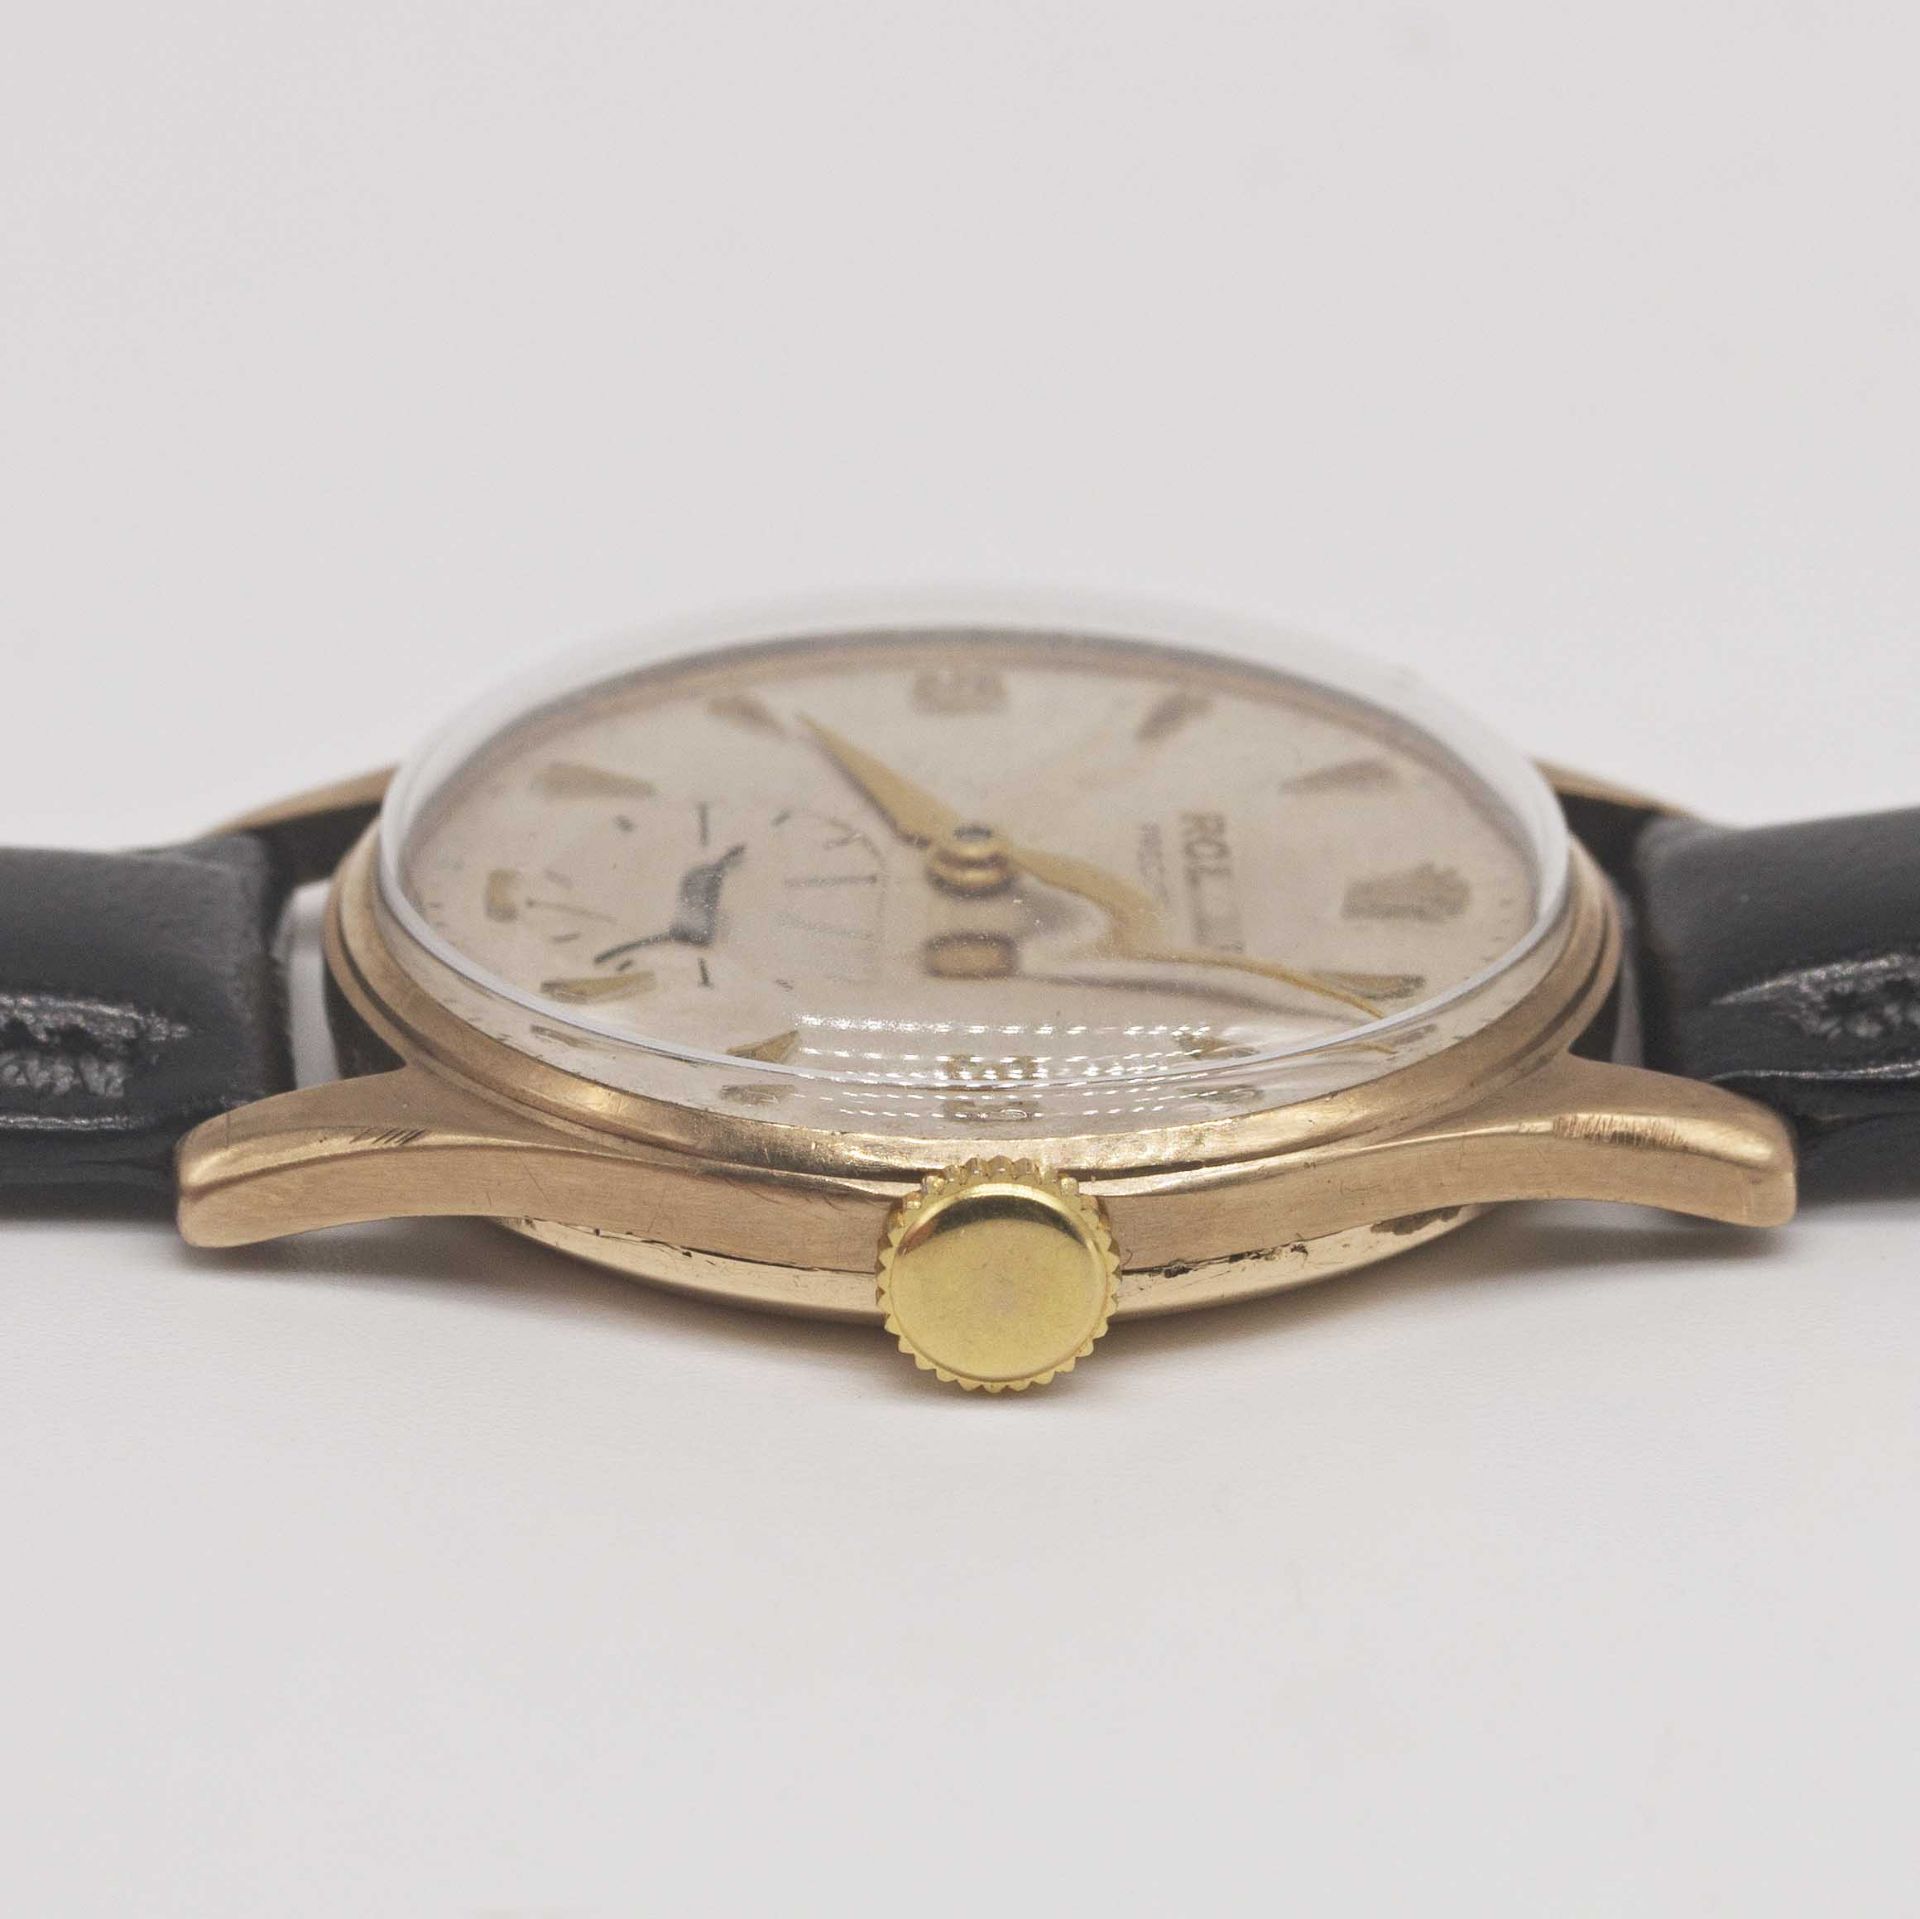 A GENTLEMAN'S 9CT SOLID GOLD ROLEX PRECISION WRIST WATCH CIRCA 1958 Movement: 17J, manual wind, cal. - Image 9 of 10